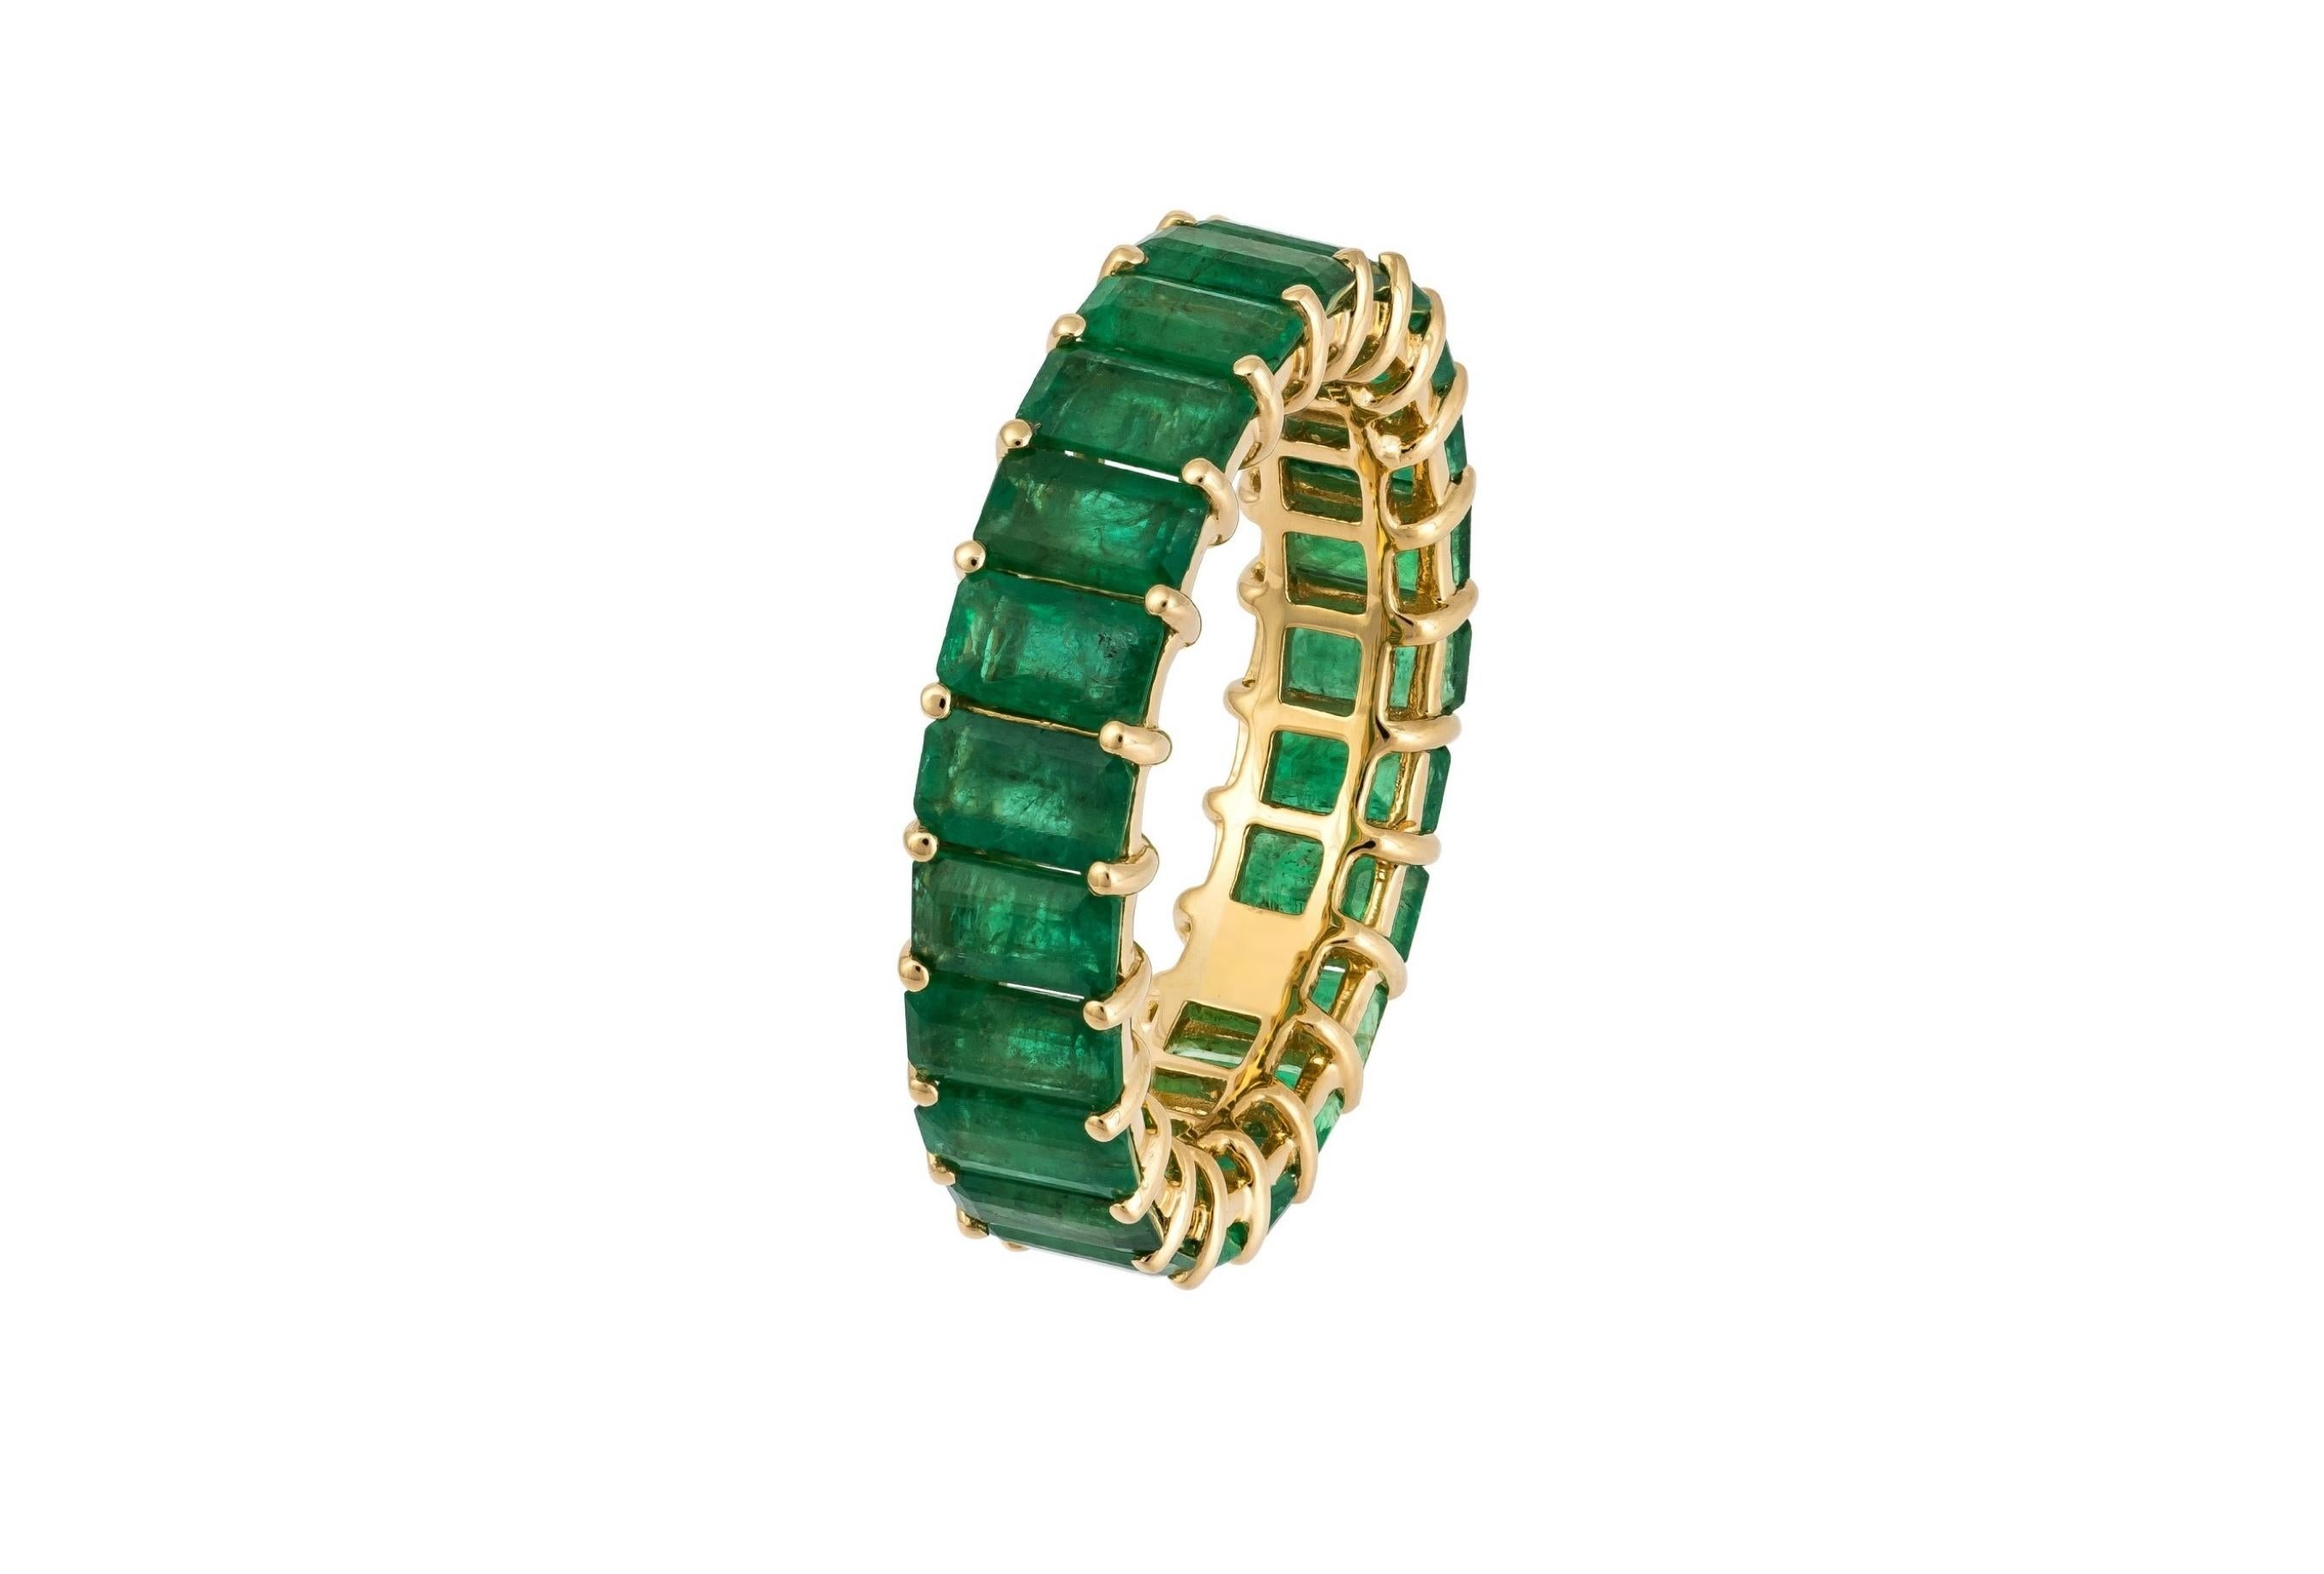 The Following Item we are offering is this Rare Important Radiant 18KT Gold Gorgeous Glittering and Sparkling Magnificent Fancy Emerald Cut Emerald Ring Eternity Band. Ring Contains approx 6.50CTS of Beautiful Fancy Green Emerald Cut Emeralds!!!